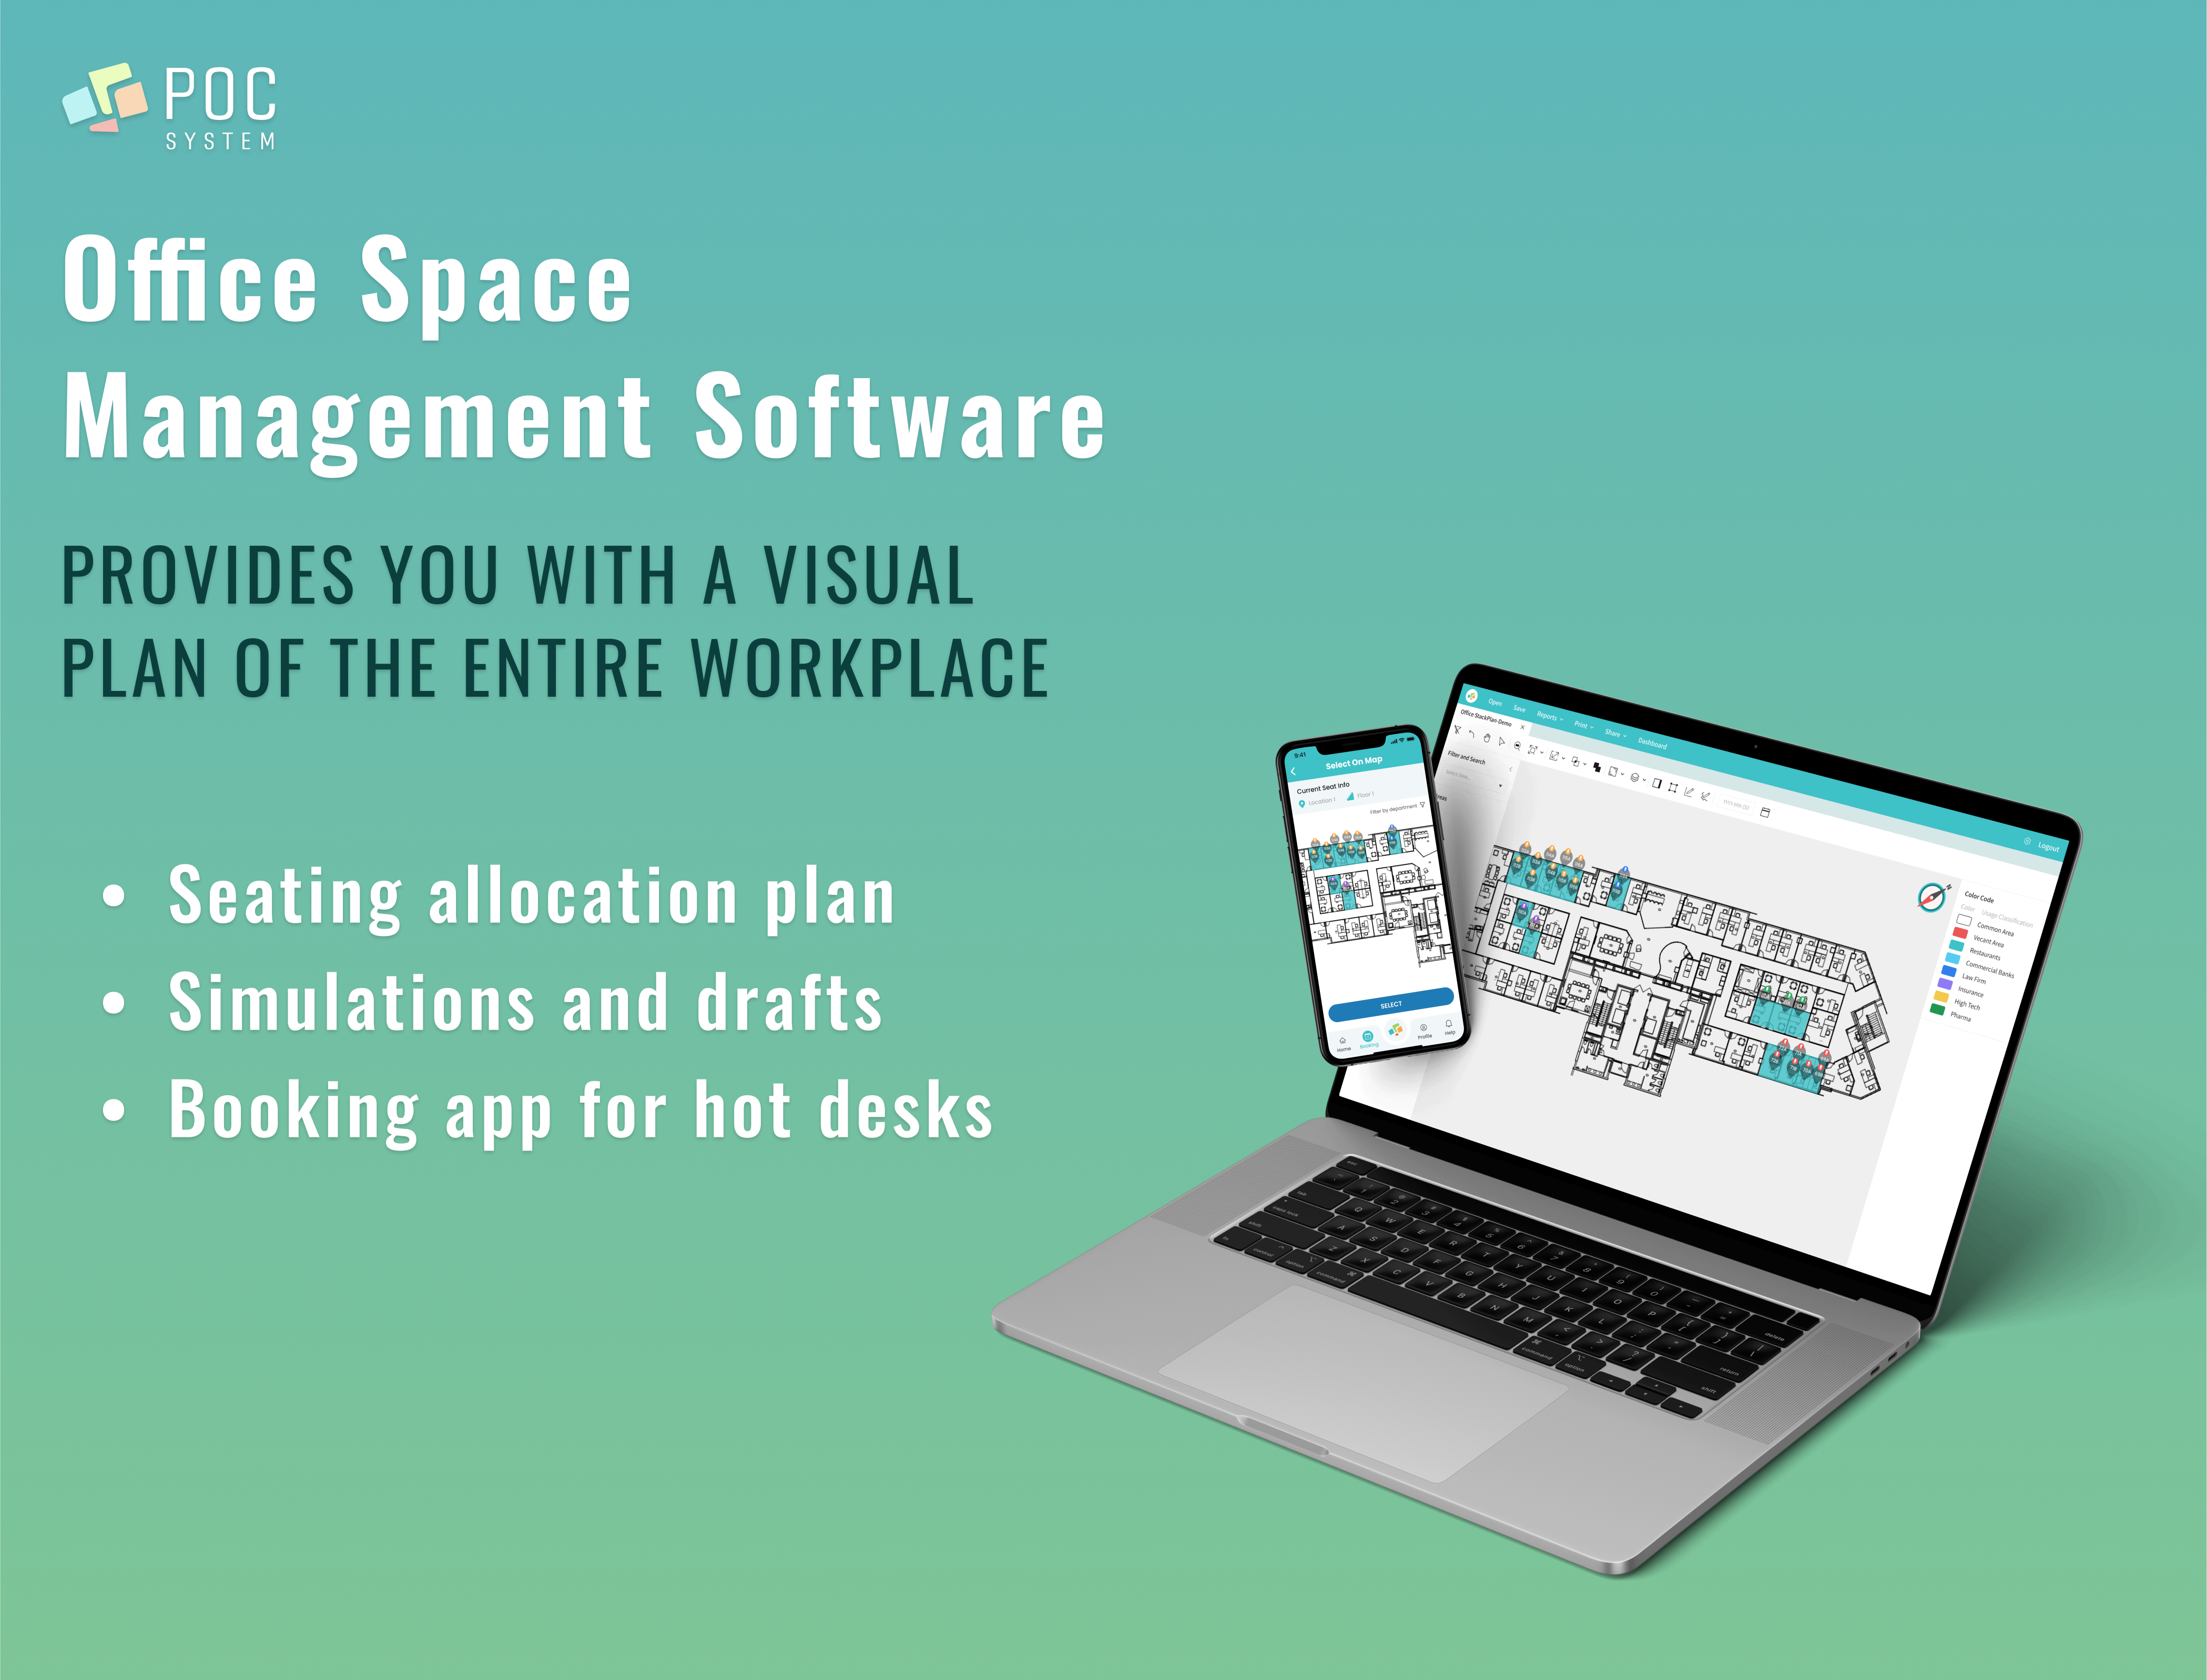 POC System – Office Space Management Software